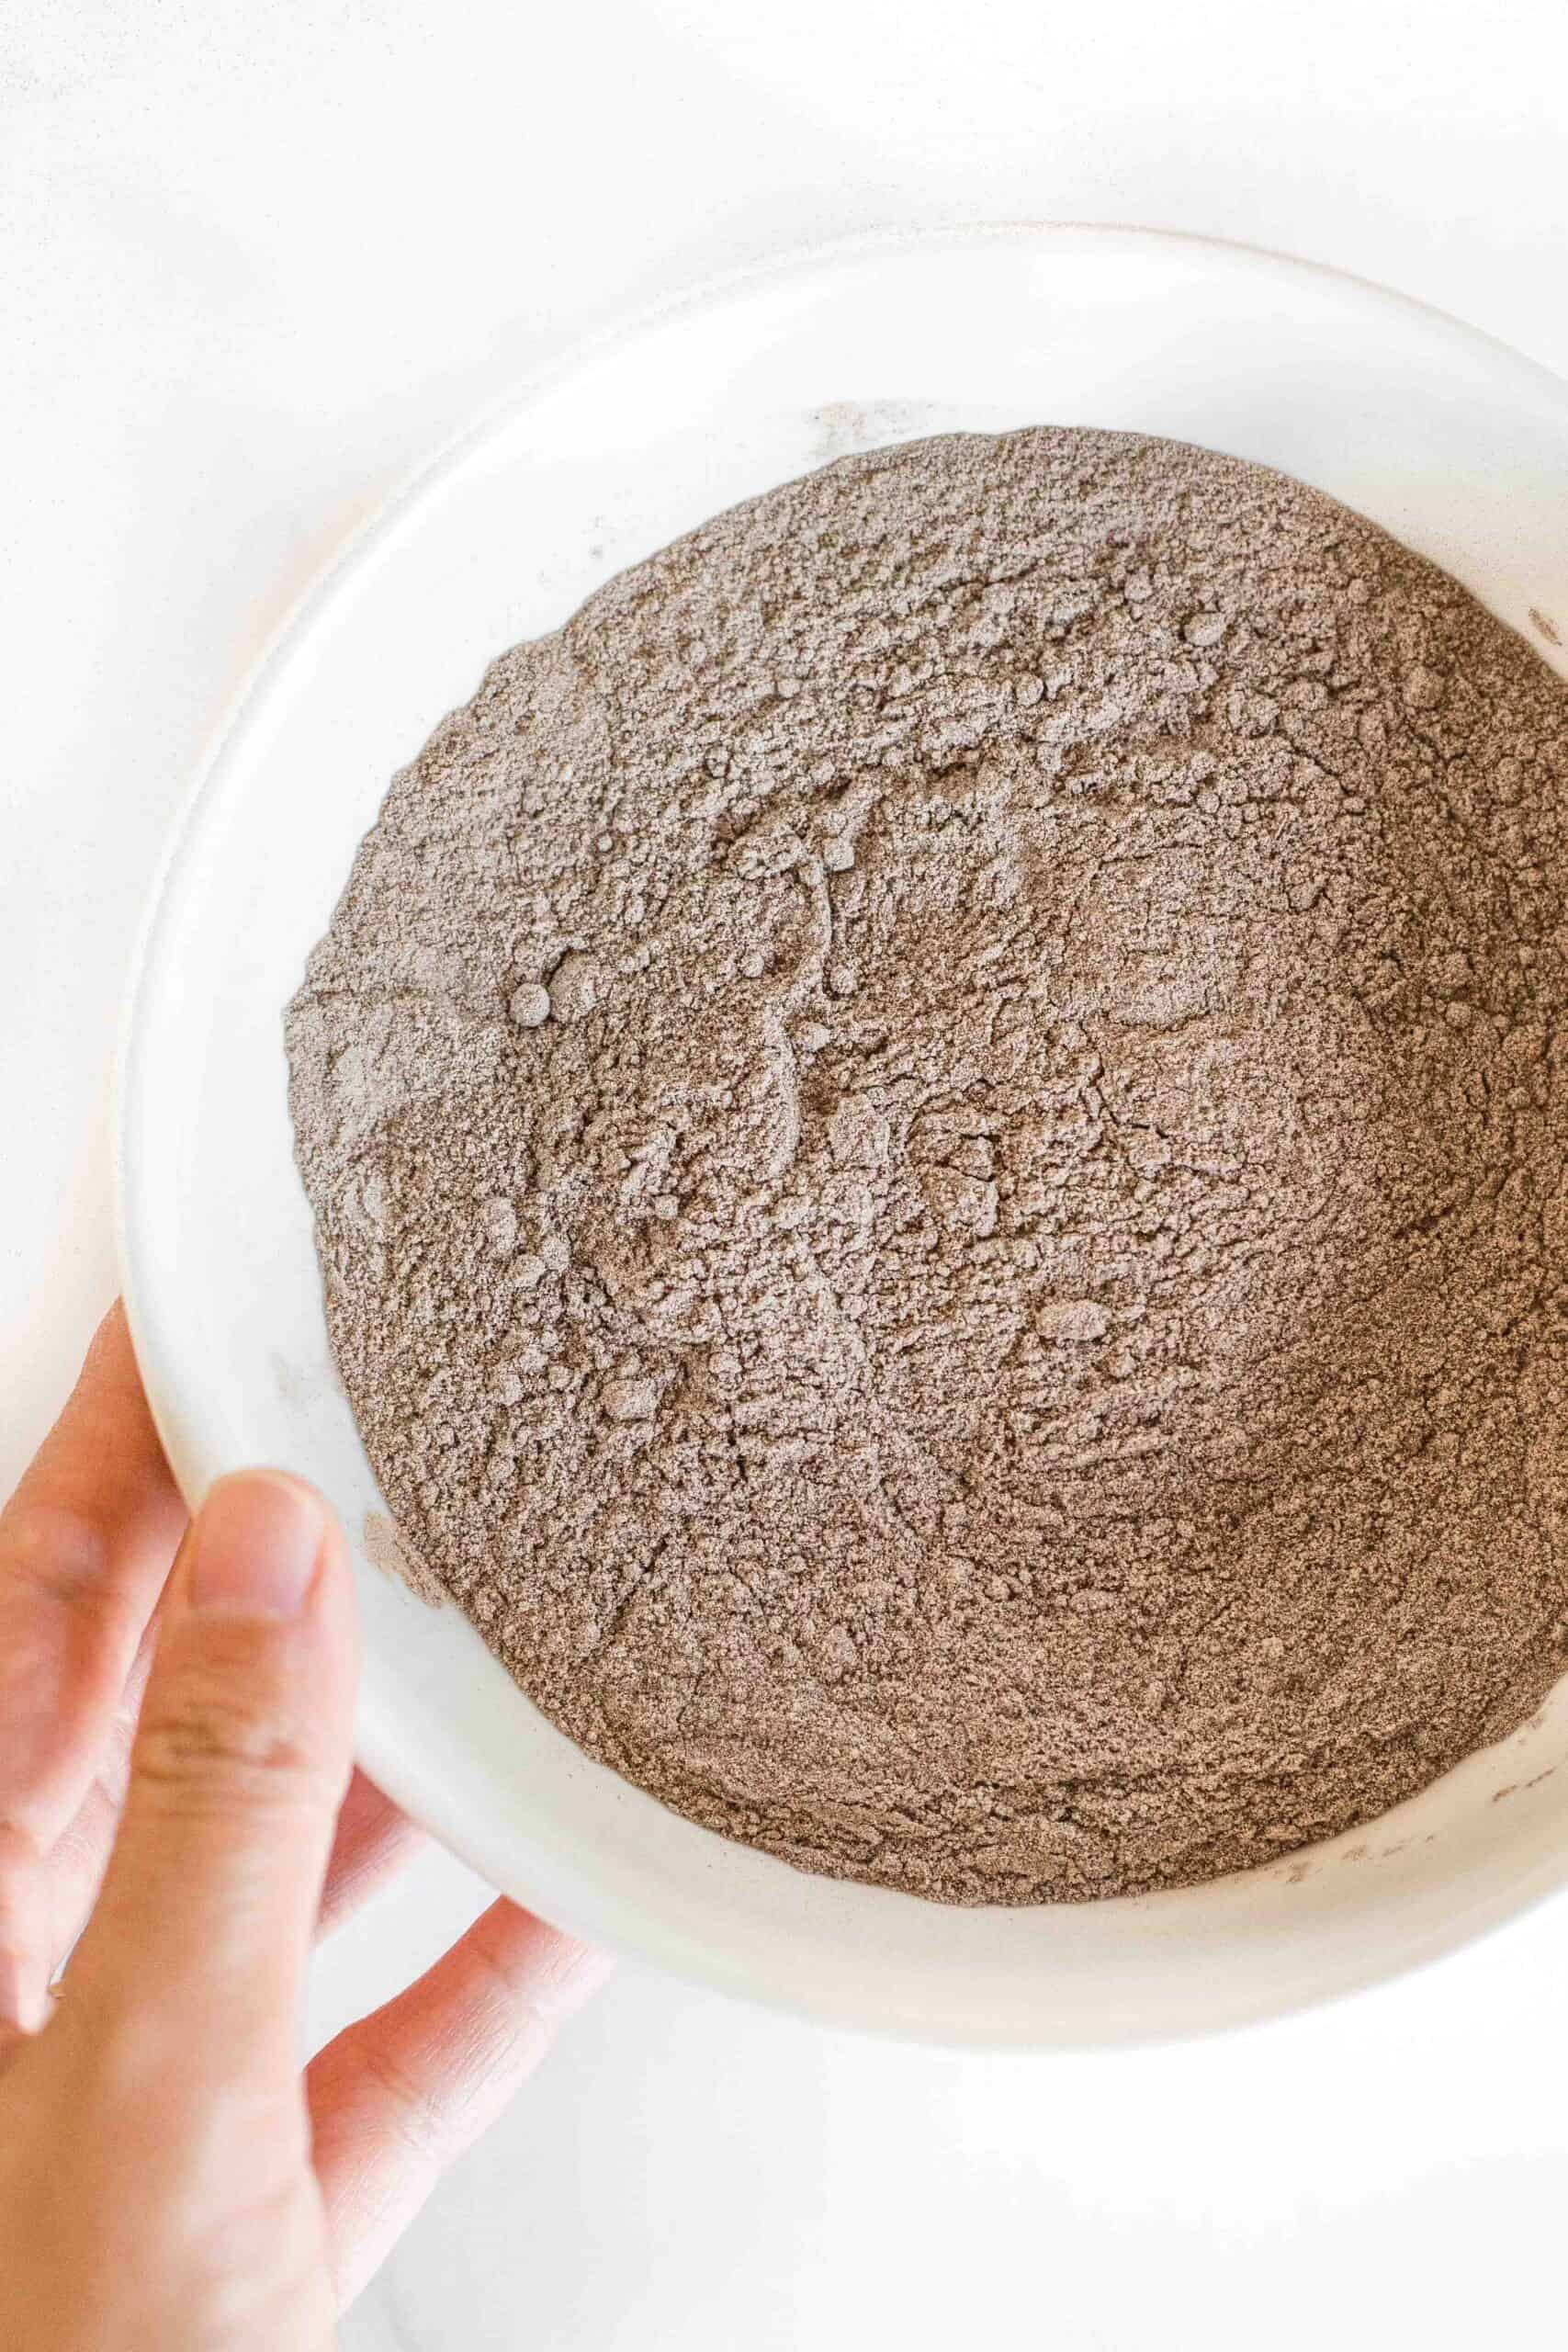 Holding a bowl of teff flour.